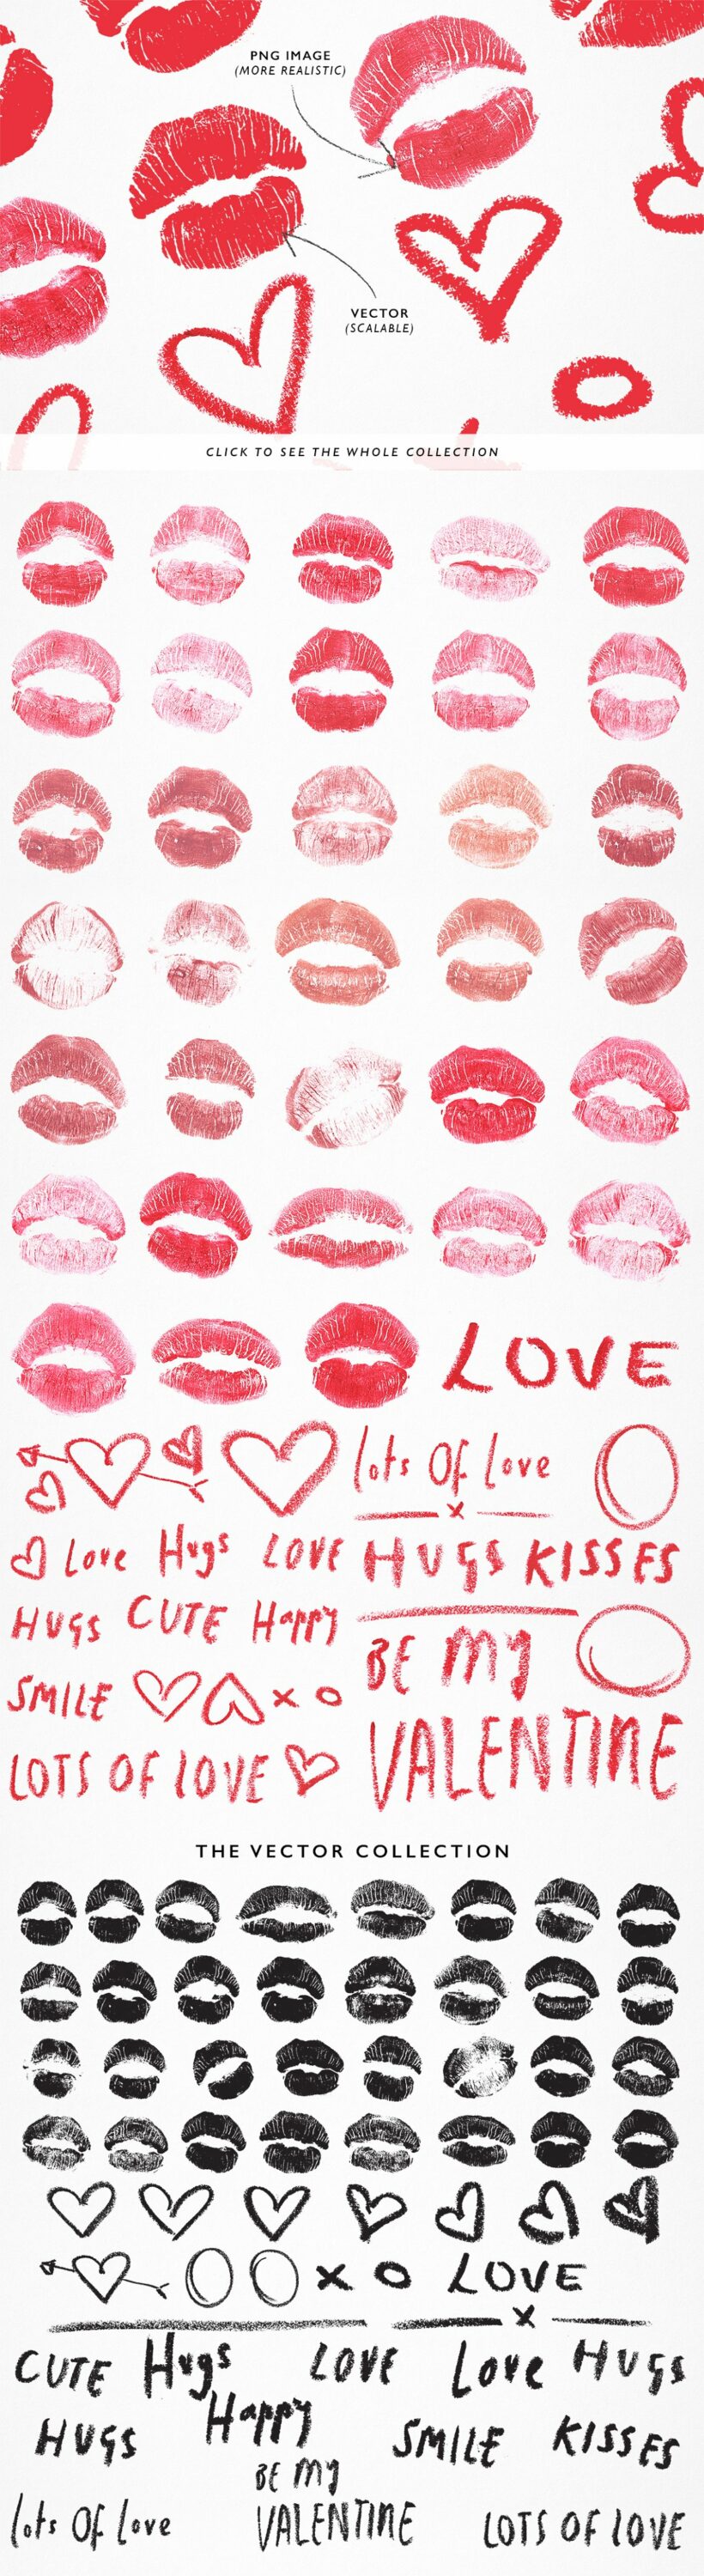 A set of different illustrations of hearts and lips in pink and black on a white background.